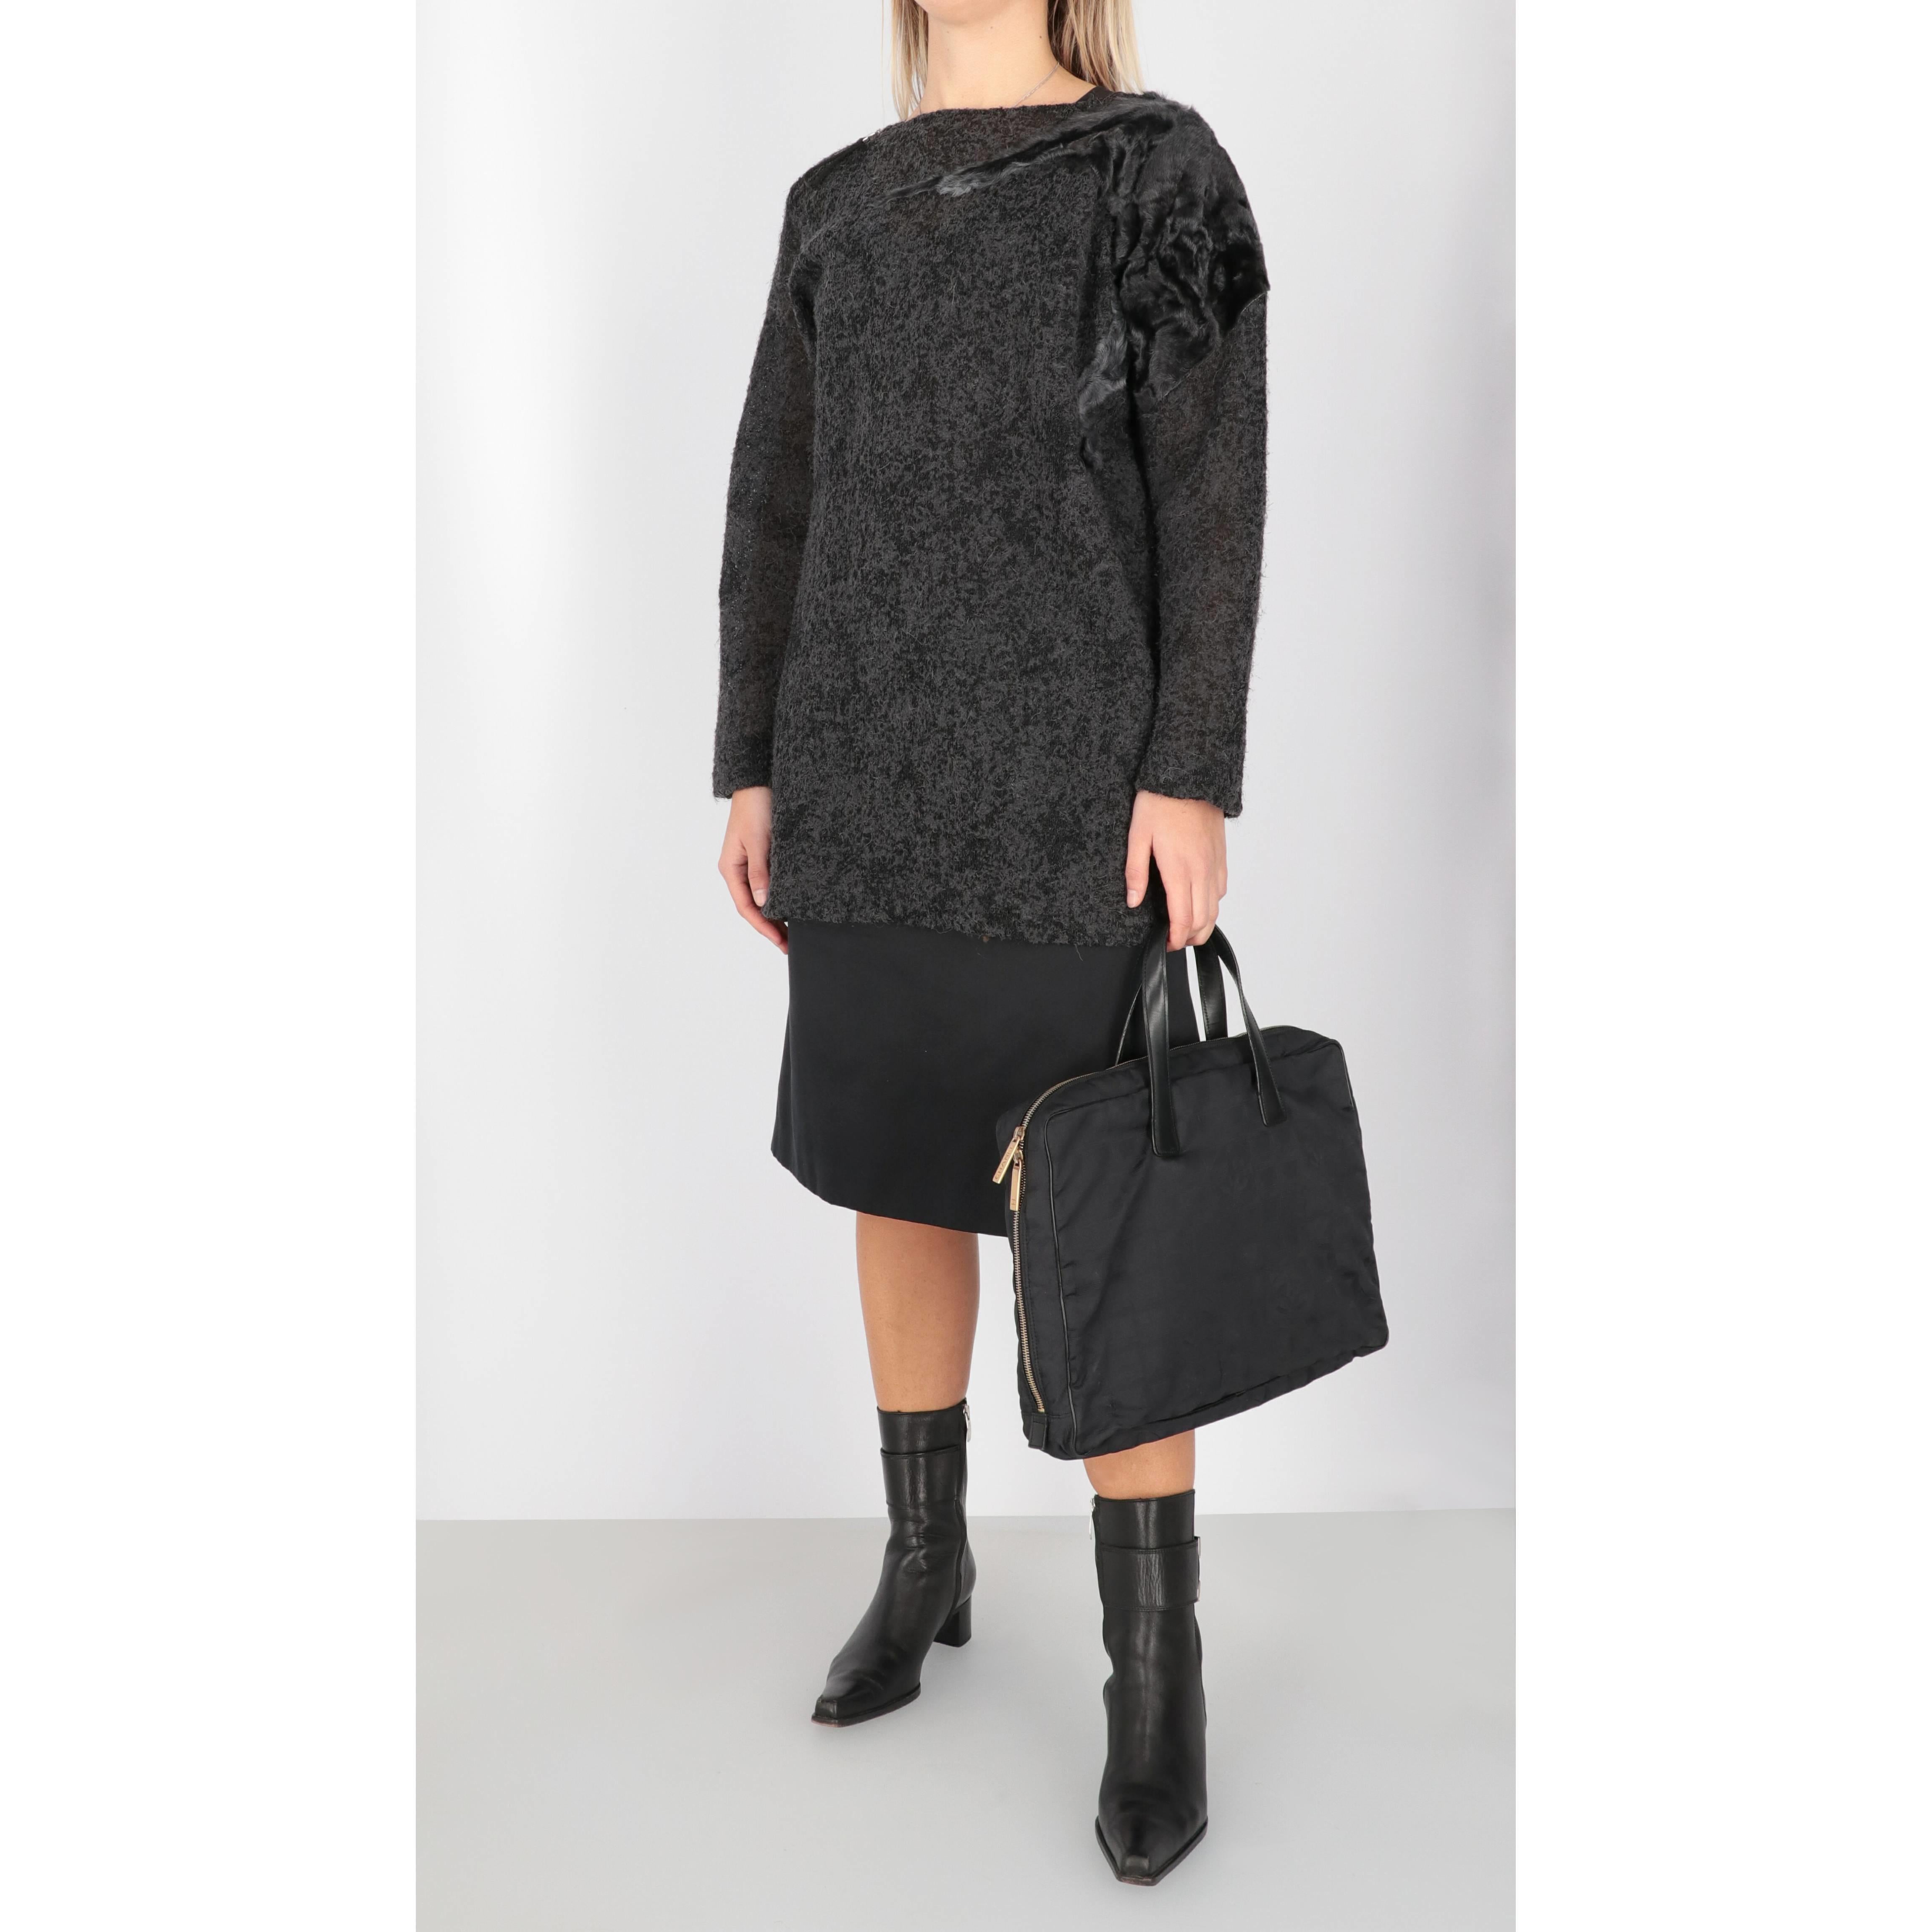 Gianfranco Ferré alpaca, mohair and wool blend dark gray sweater with tone-on-tone lamb fur details. Crewneck model, with long sleeves, zip on the right shoulder with black leather puller and side slit on the bottom. Black silk tank top.

This item